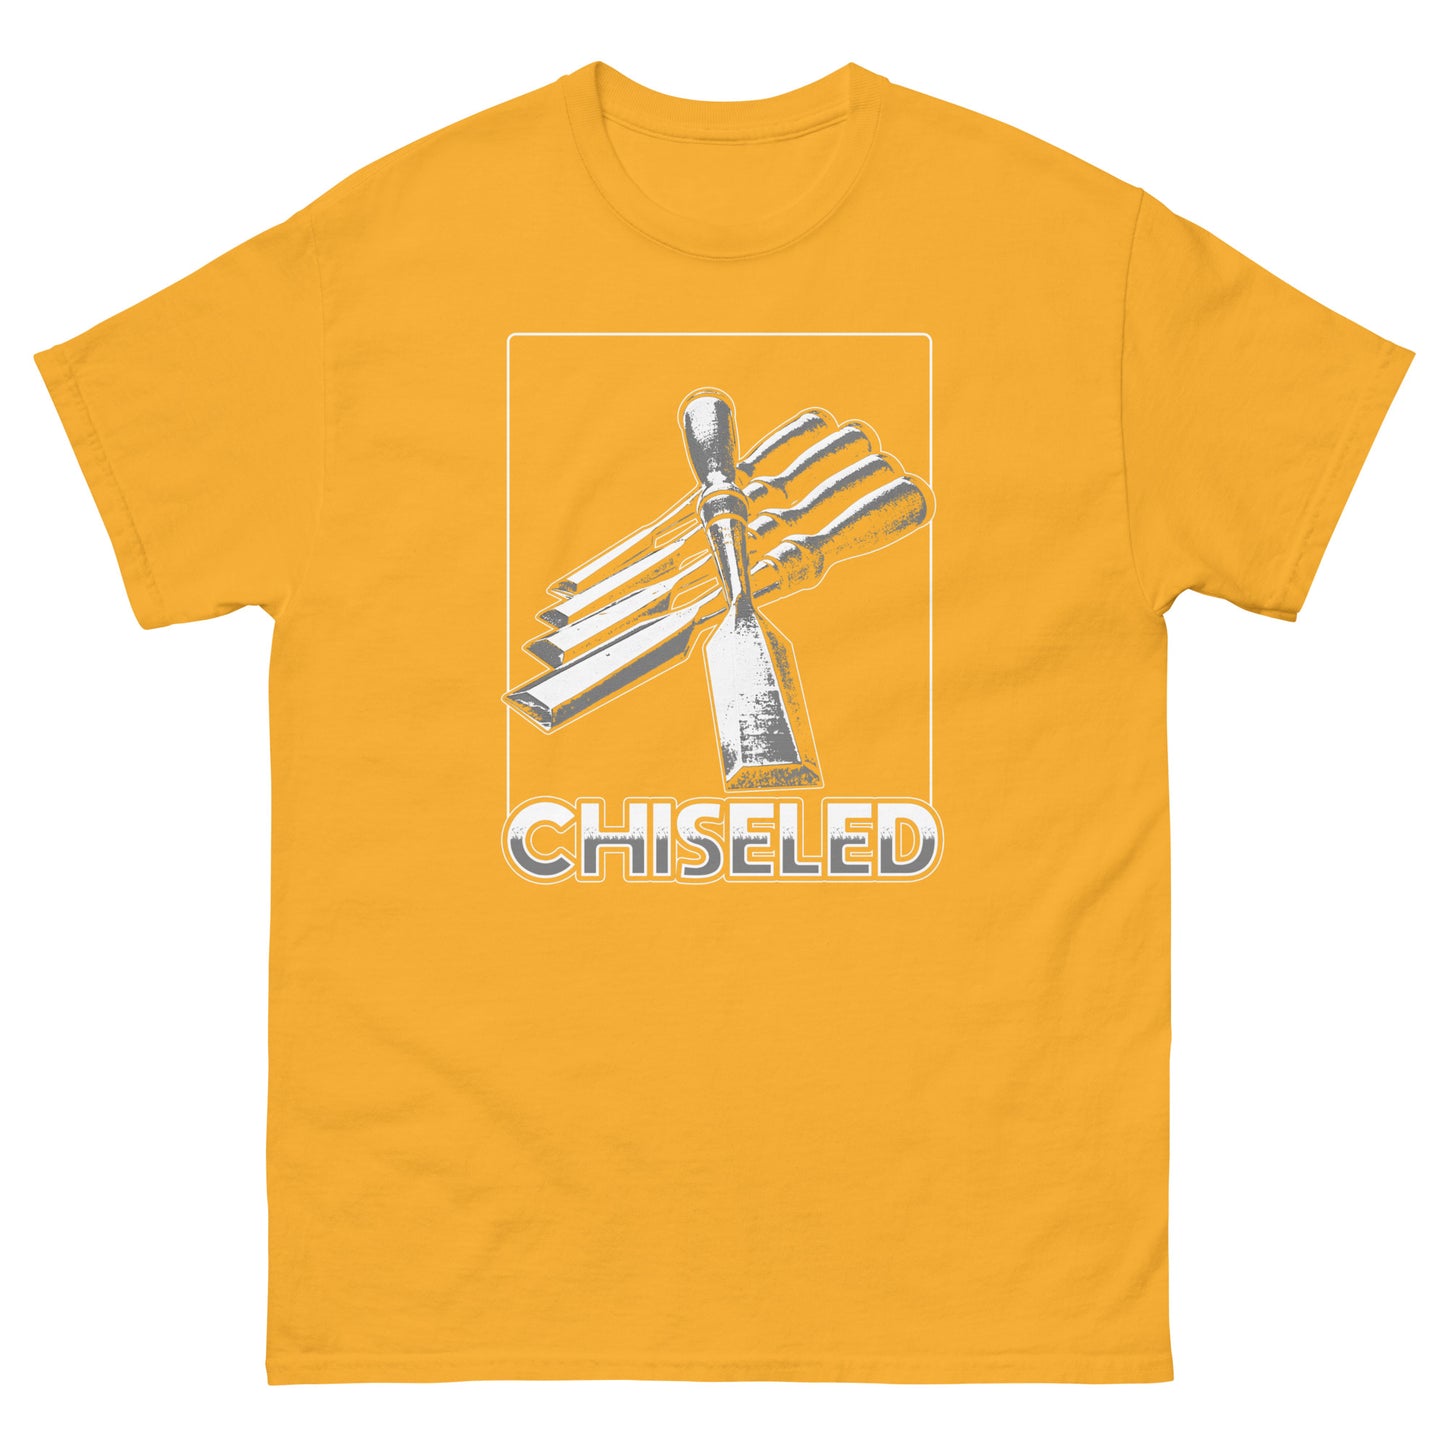 "Chiseled" Woodworking T-Shirt (Multiple Colors)